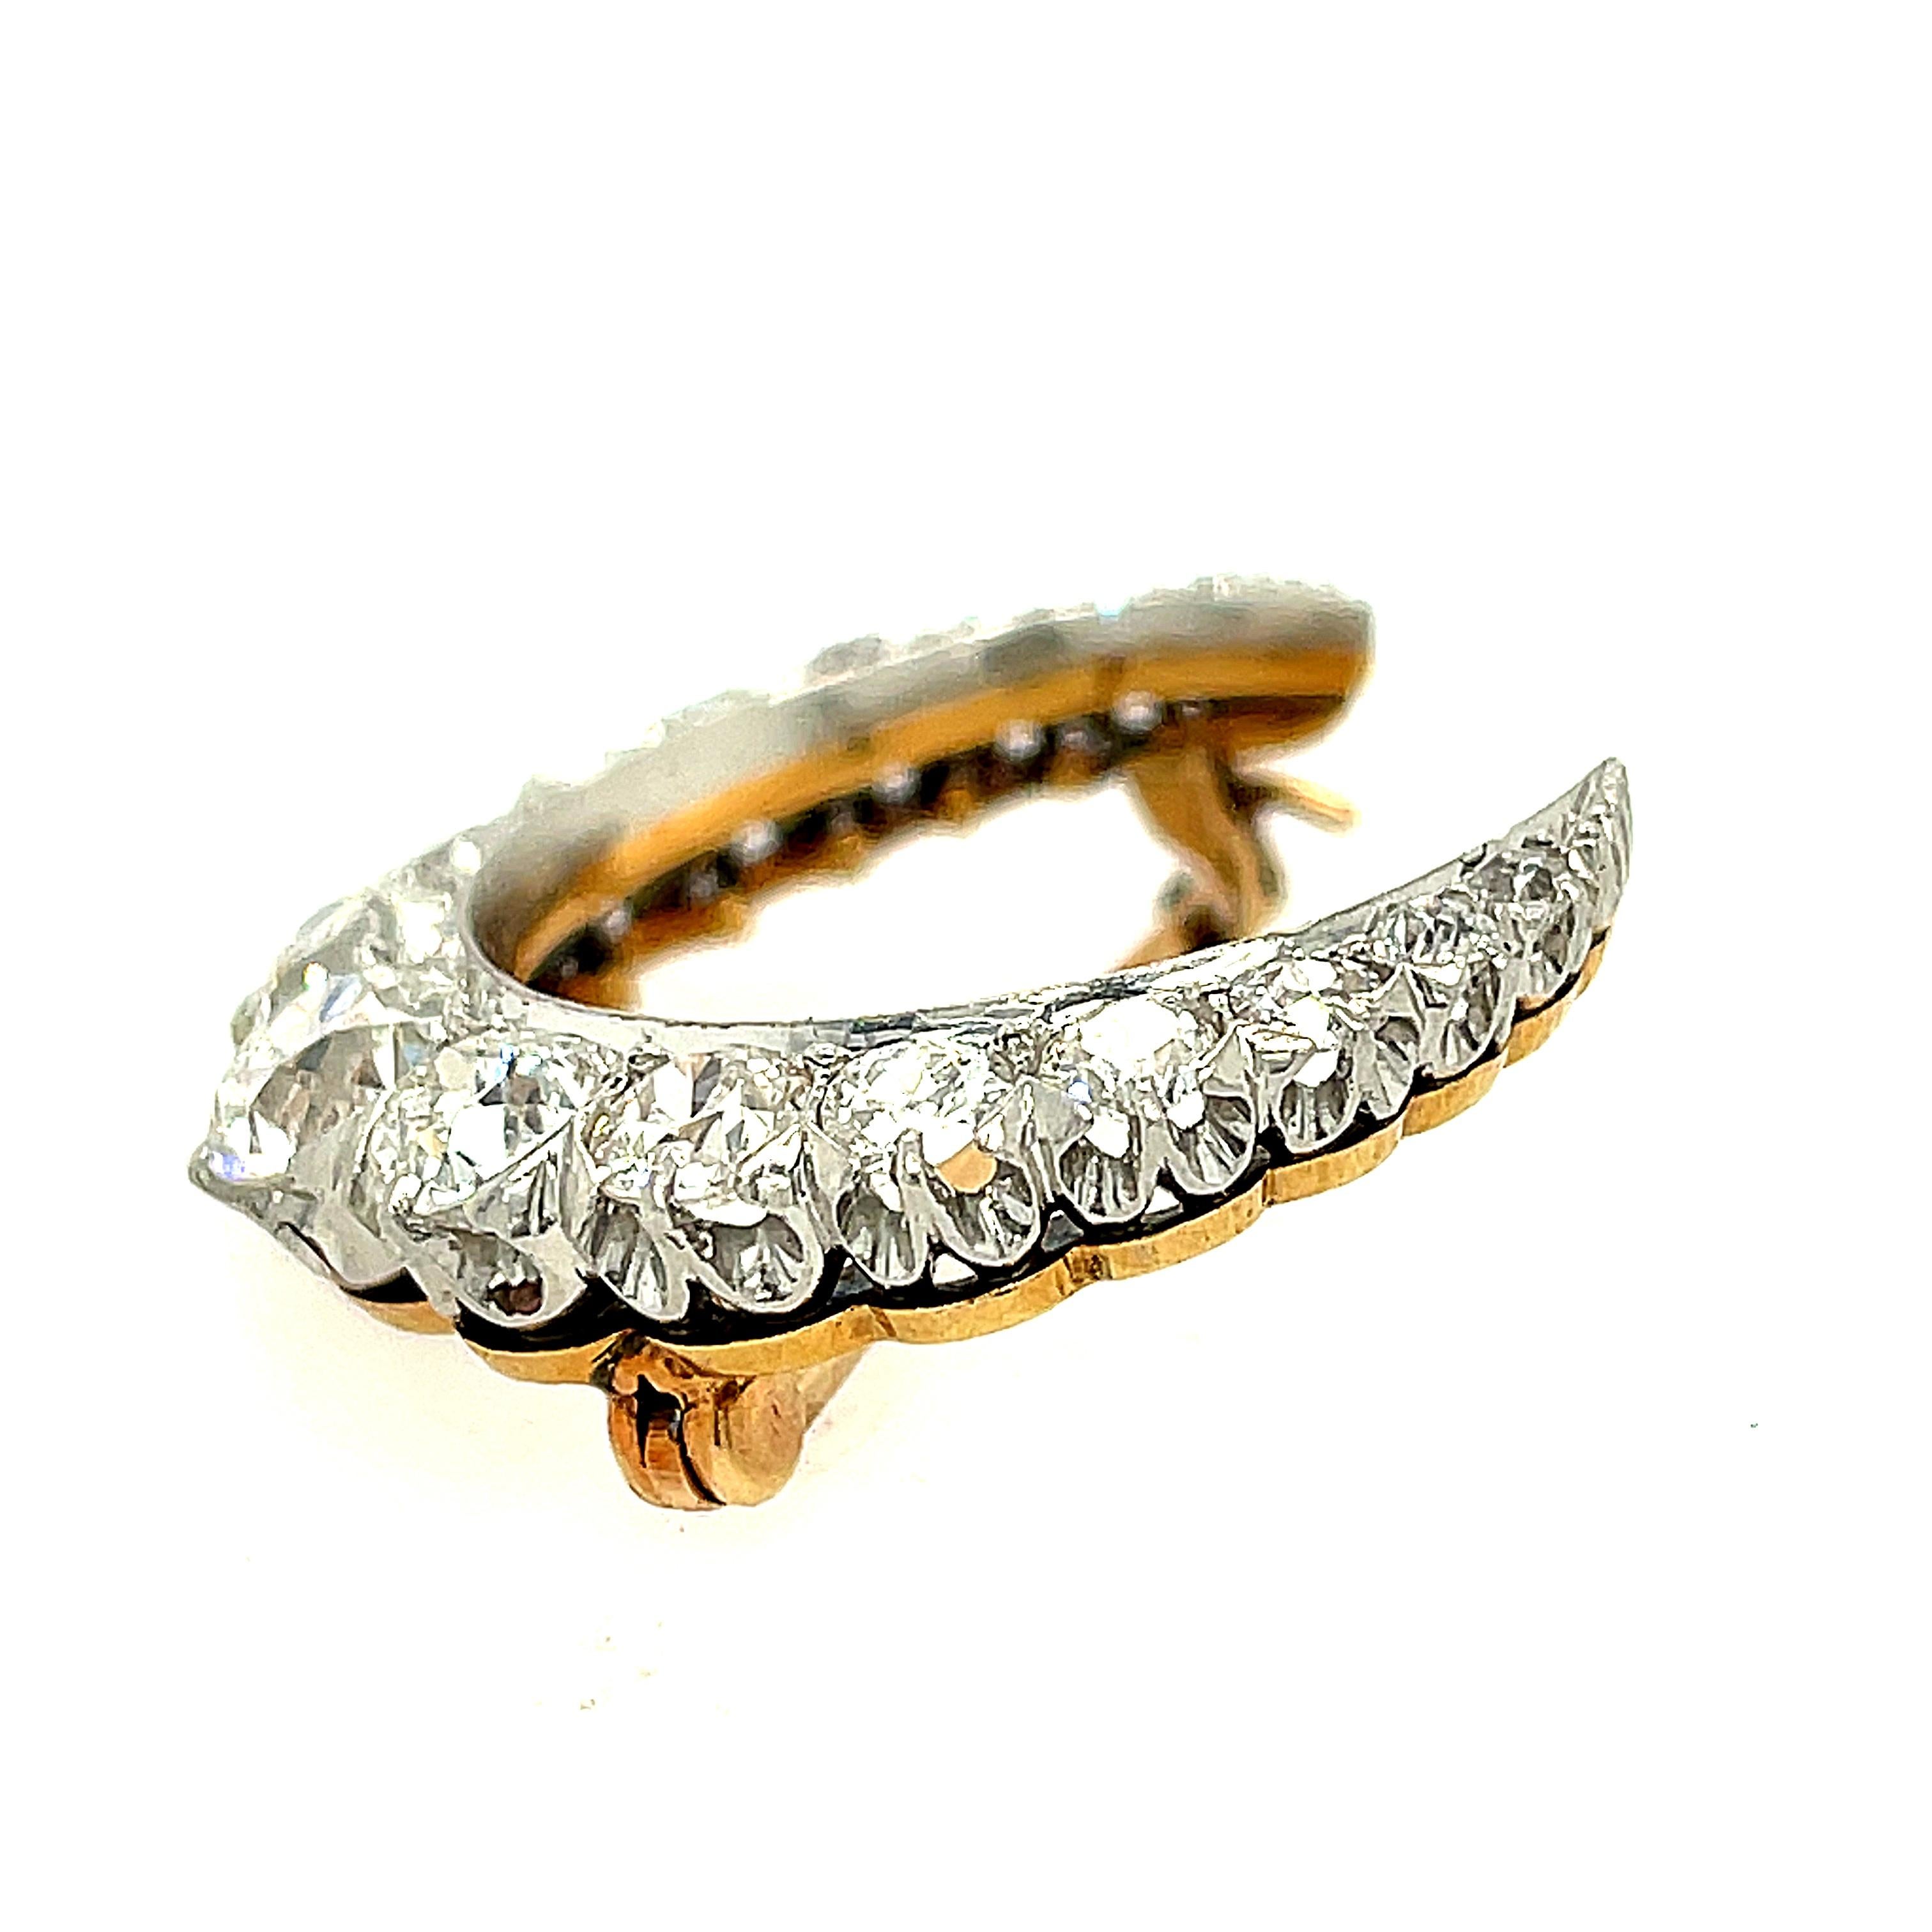 A pristine antique Edwardian platinum topped gold crescent pin set with Old European cut diamonds, circa 1900. The diamonds in this pin are white and clean, approximately G to H color and VS clarity. The total weight of the diamonds are 2.85 carats